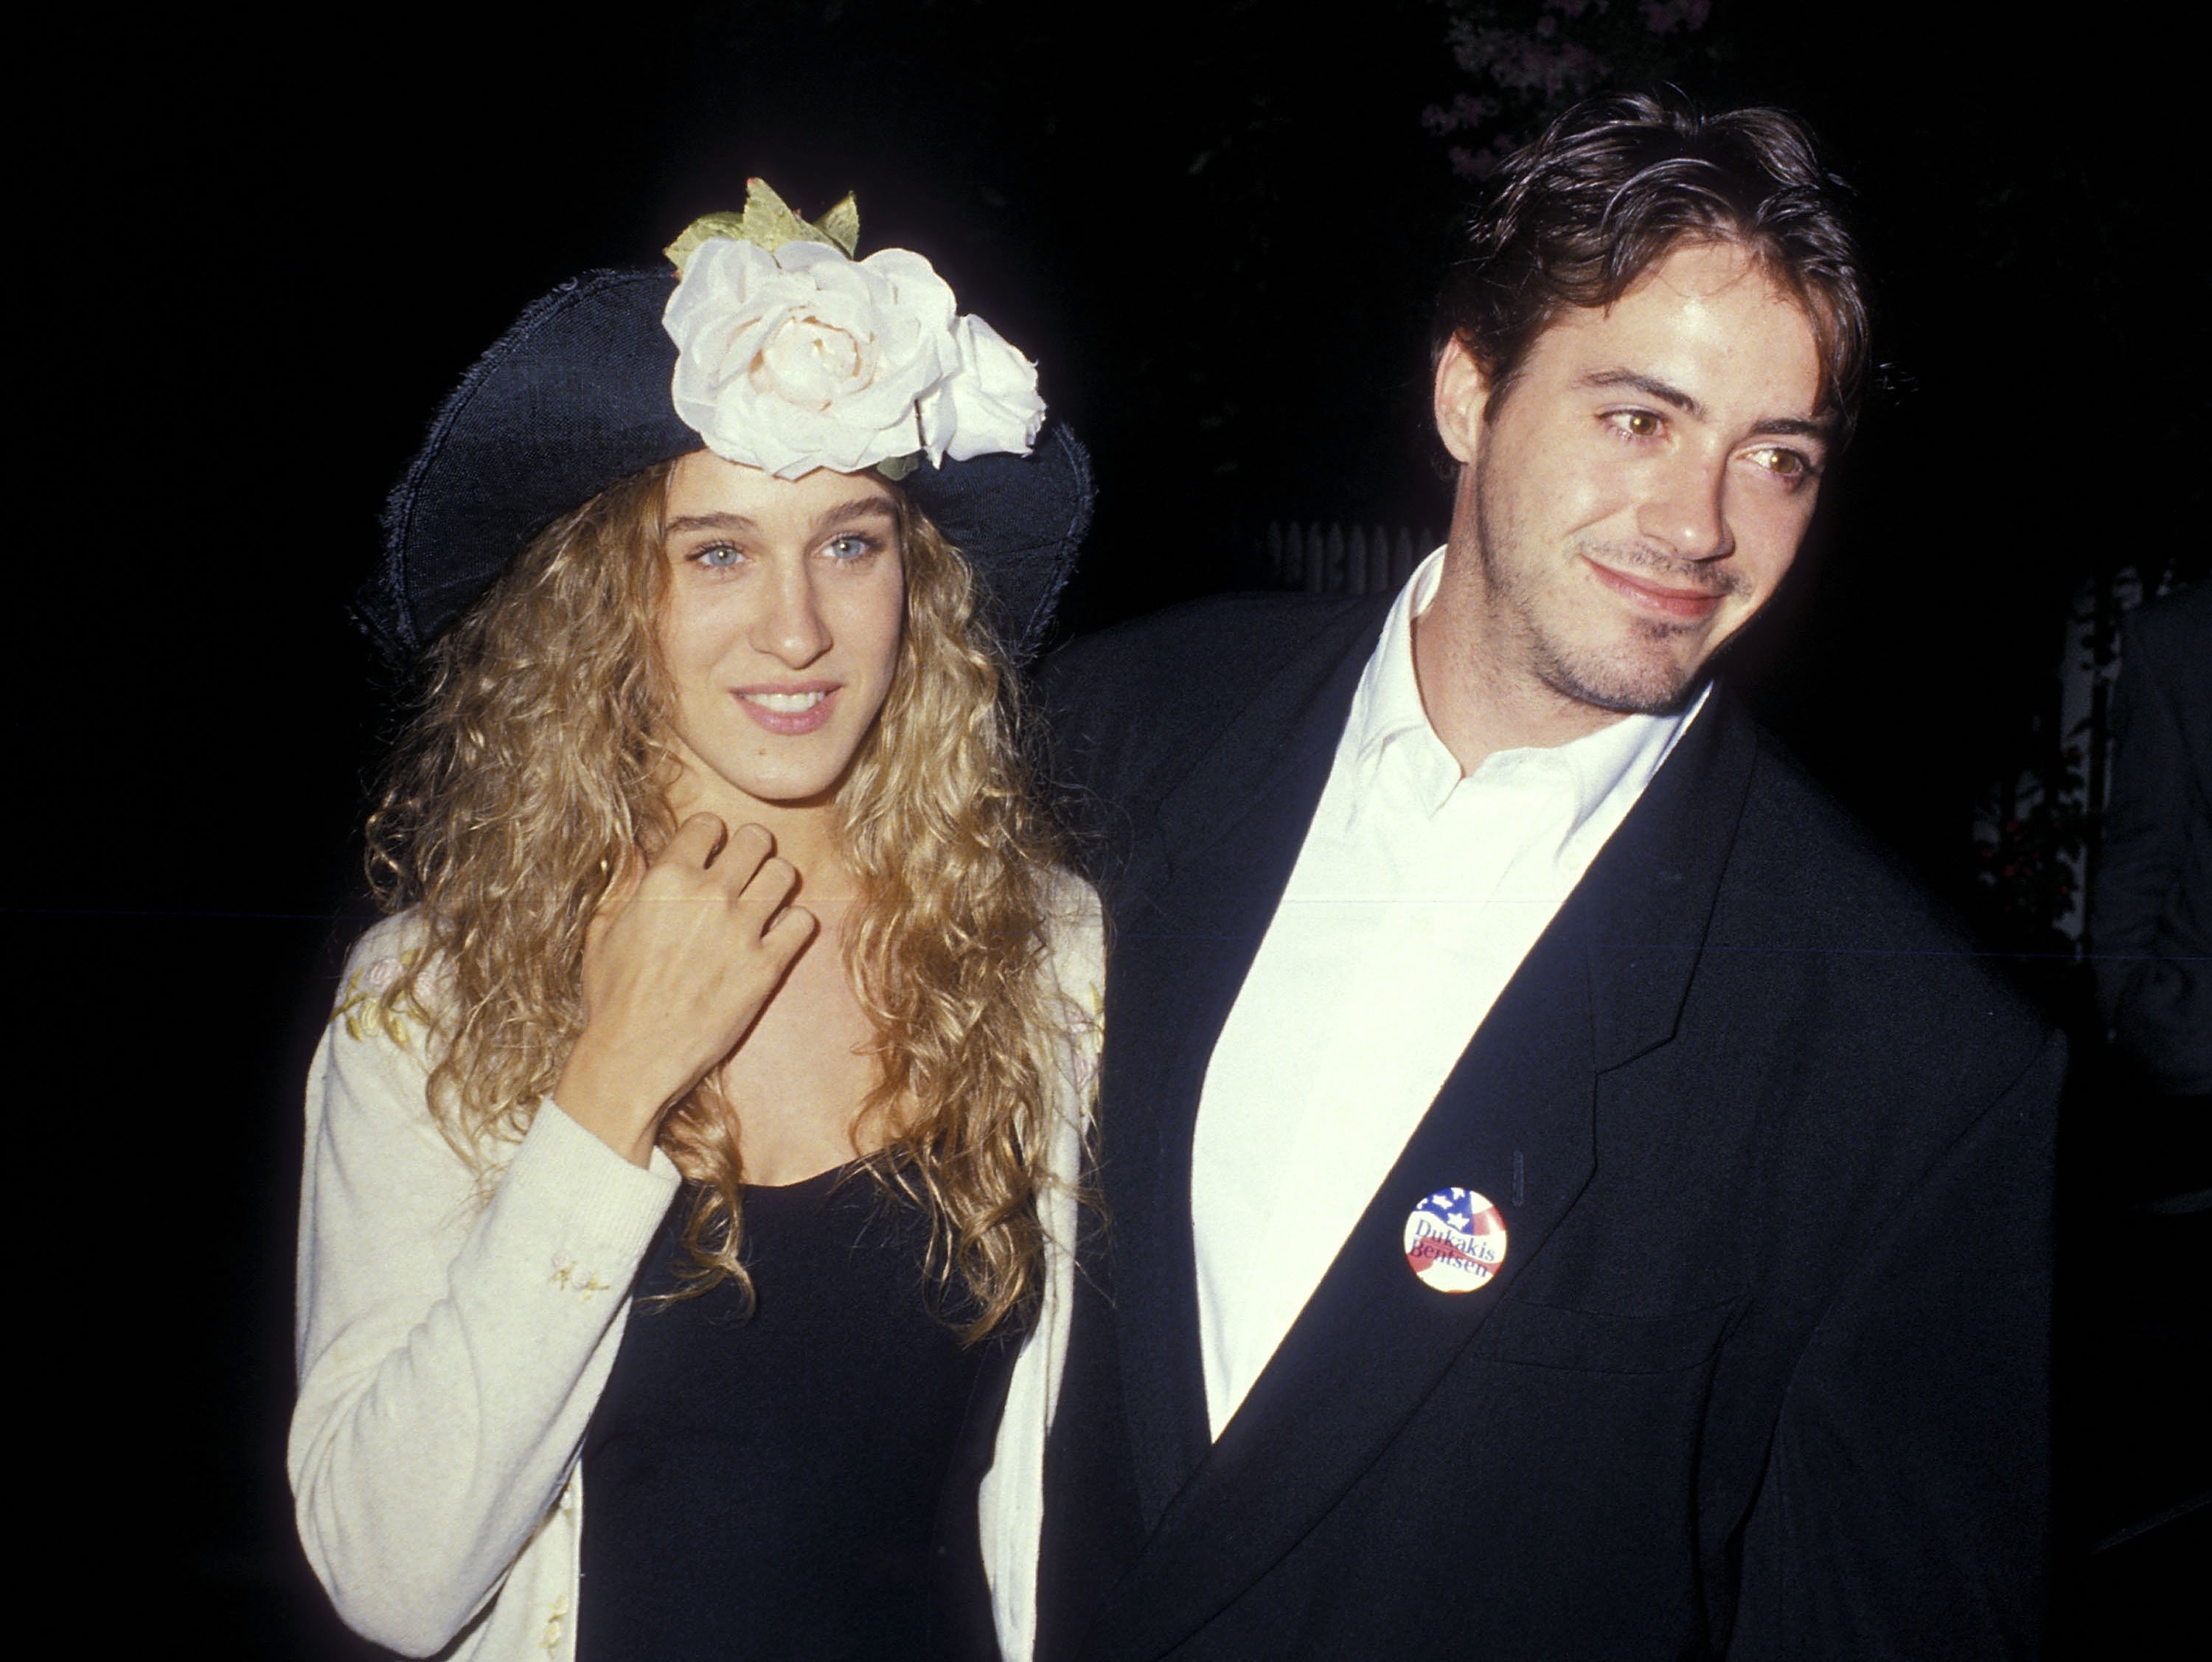 Sarah Jessica Parker and Robert Downey, Jr. attend the 1988 Presidential Campaign: Democratic Candidate Michael Dukakis' Benefit Cocktail Party